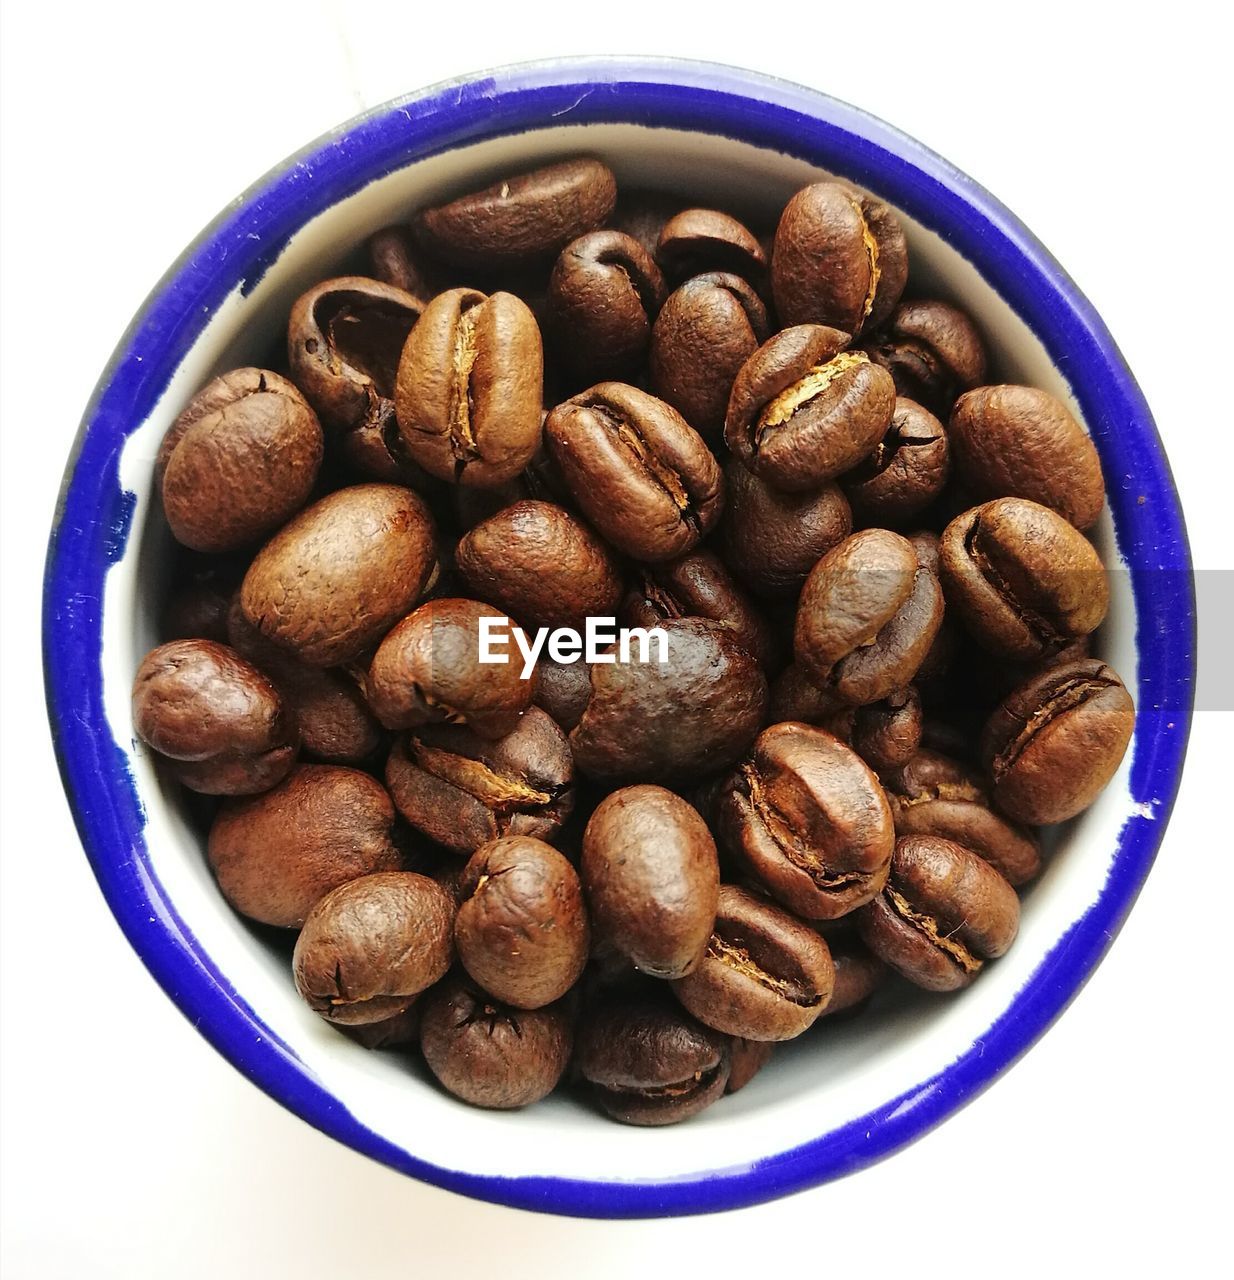 Roasted coffee beans in bowl on white background